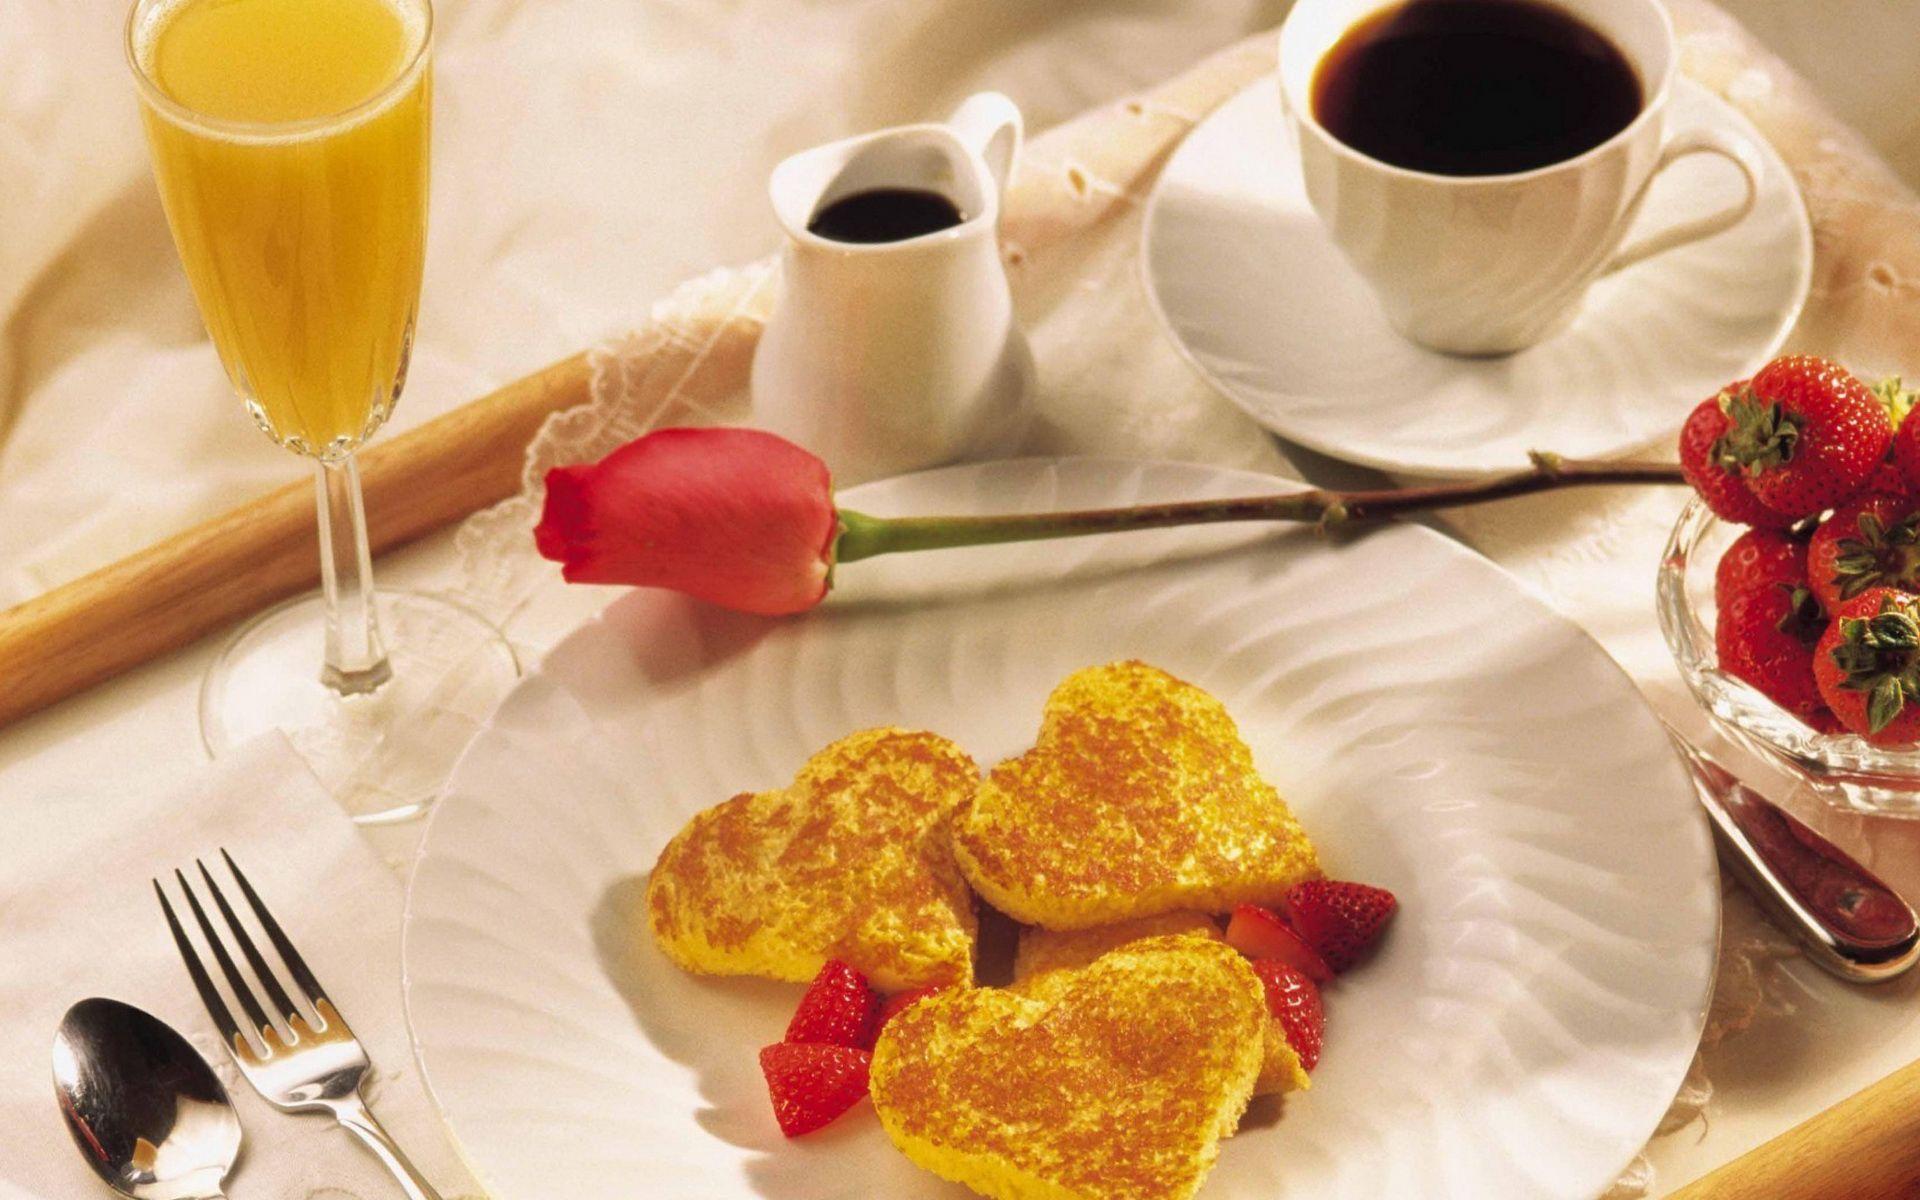 Breakfast wallpaper and image, picture, photo